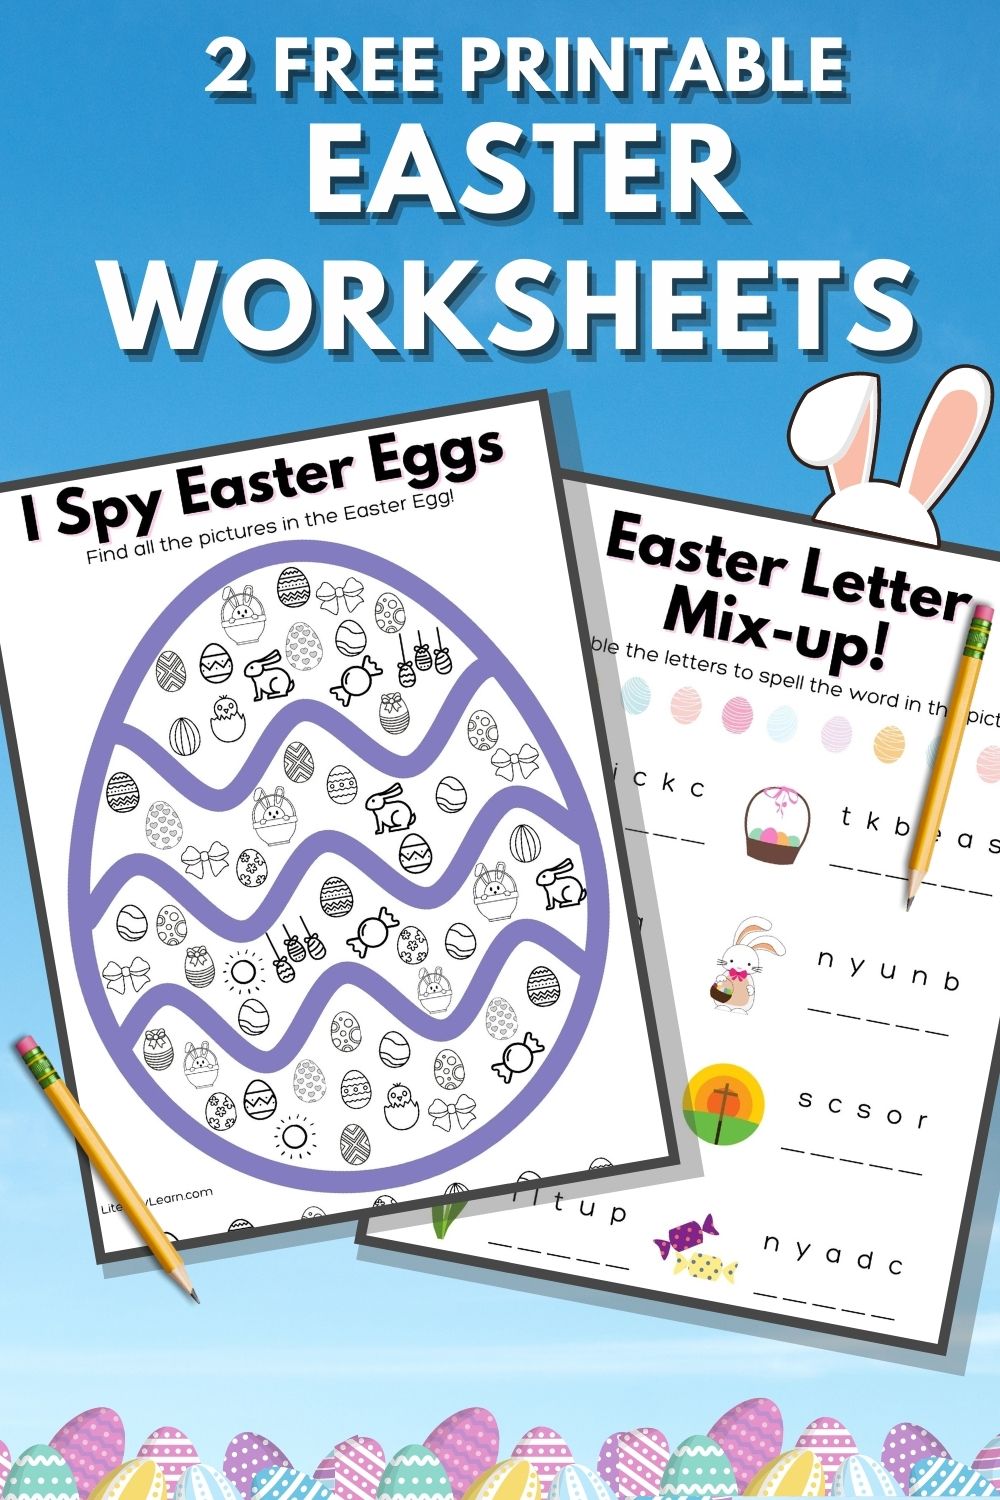 Graphic with the two worksheets and the words "2 Free Printable Easter Worksheets."